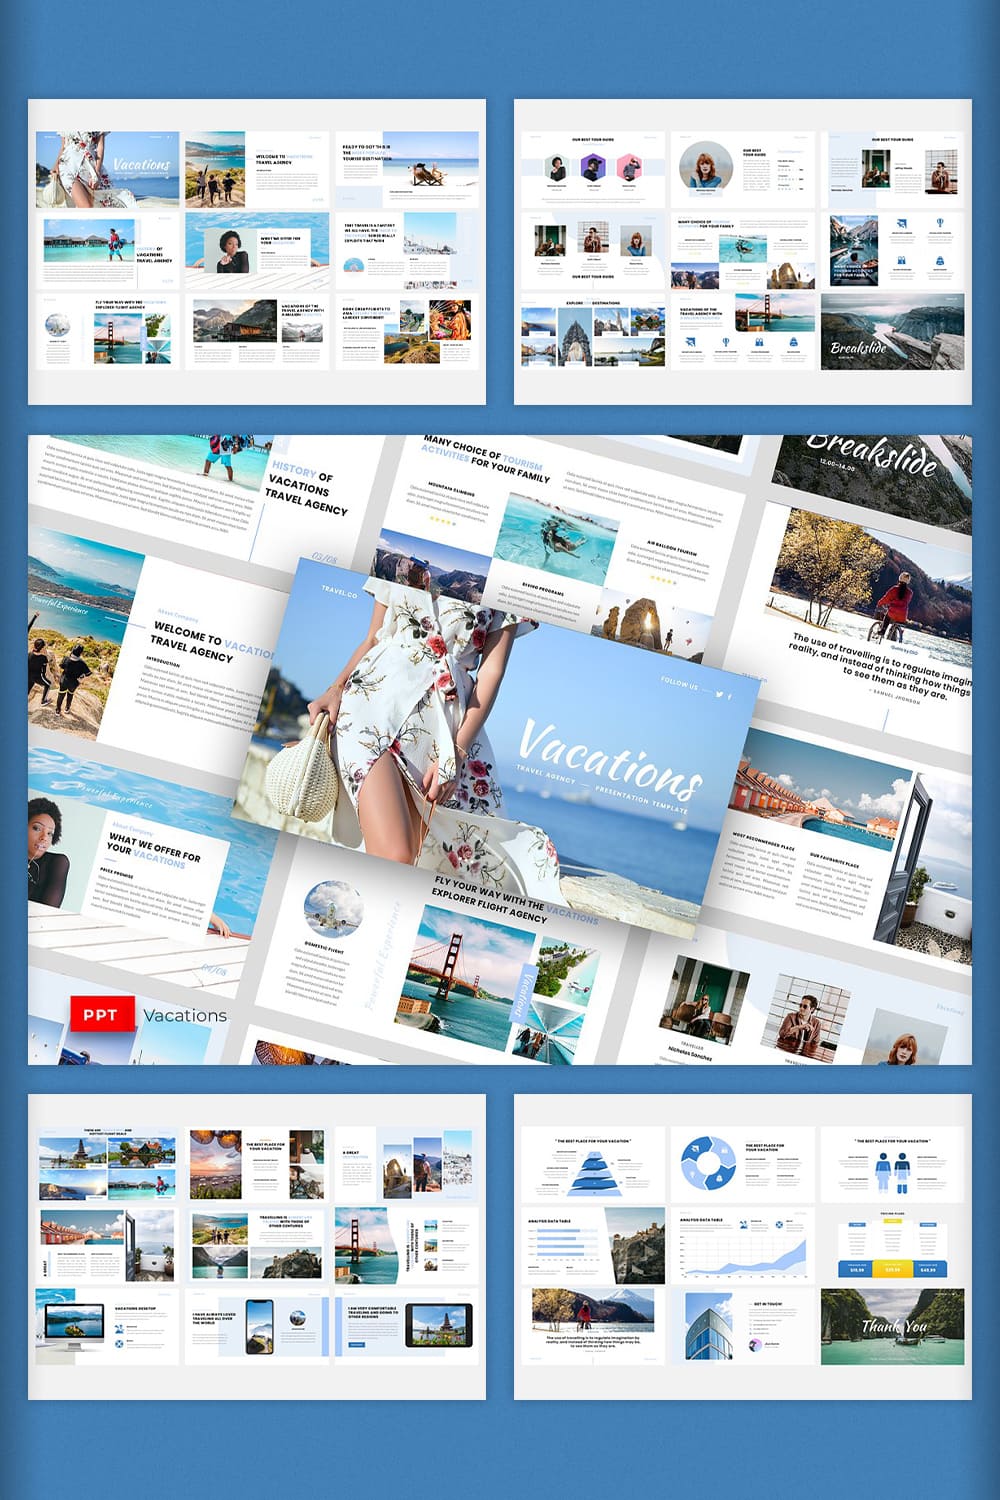 Vacation template in blue.